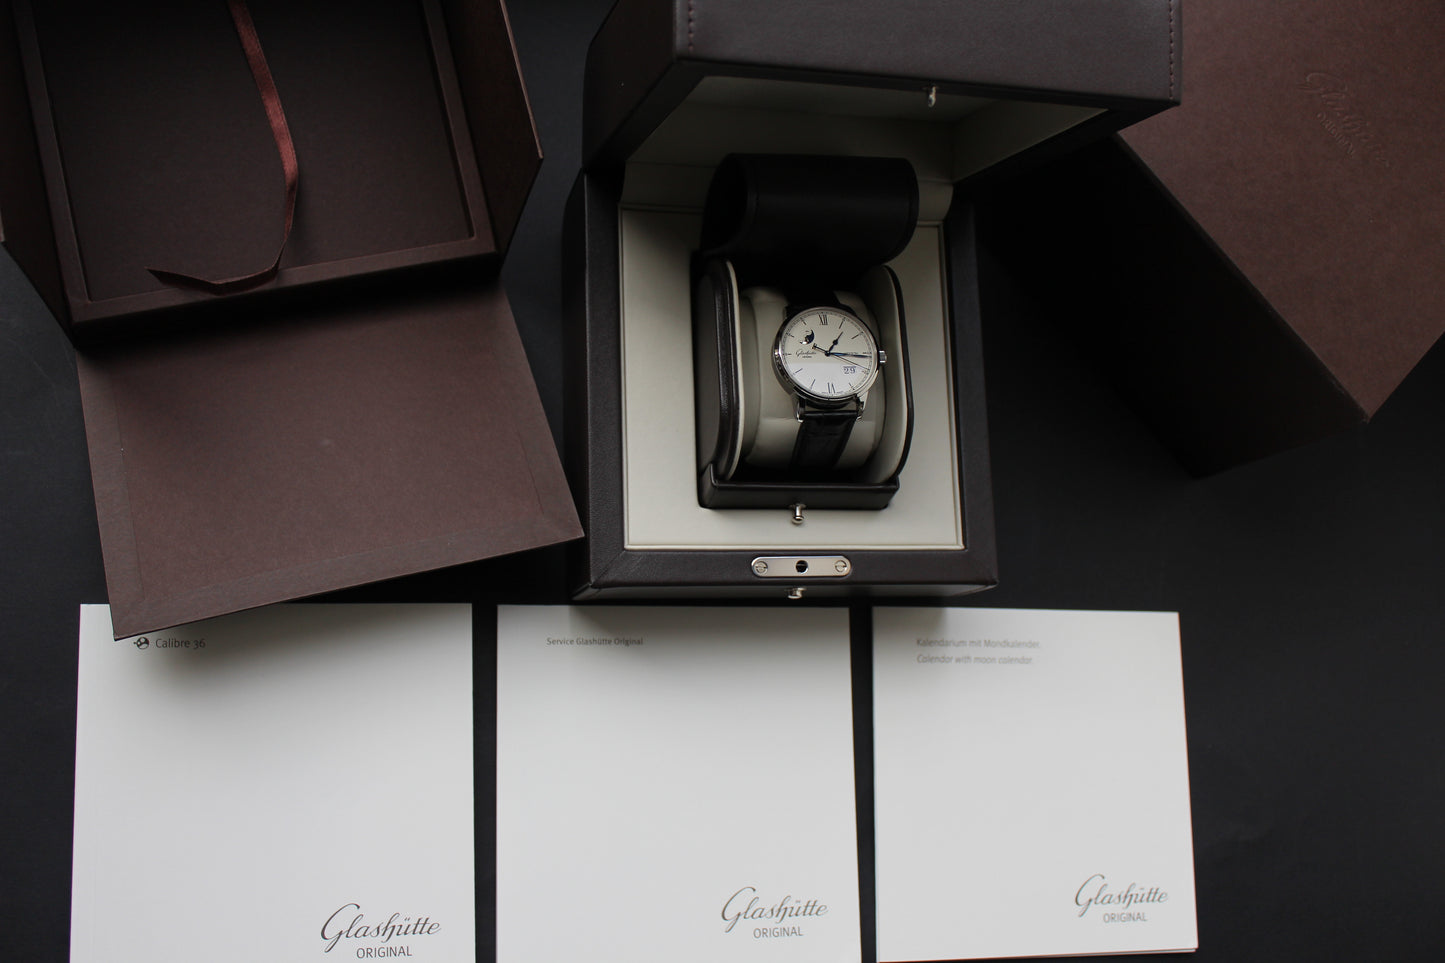 Glashütte Original Senator Excellence Panorama Date Moon Phase 1-36-04-01-02-61 (previously 1-36-04-01-02-30) silver-grainé, 40mm, stainless steel case, automatic movement, Louisiana alligator leather strap black